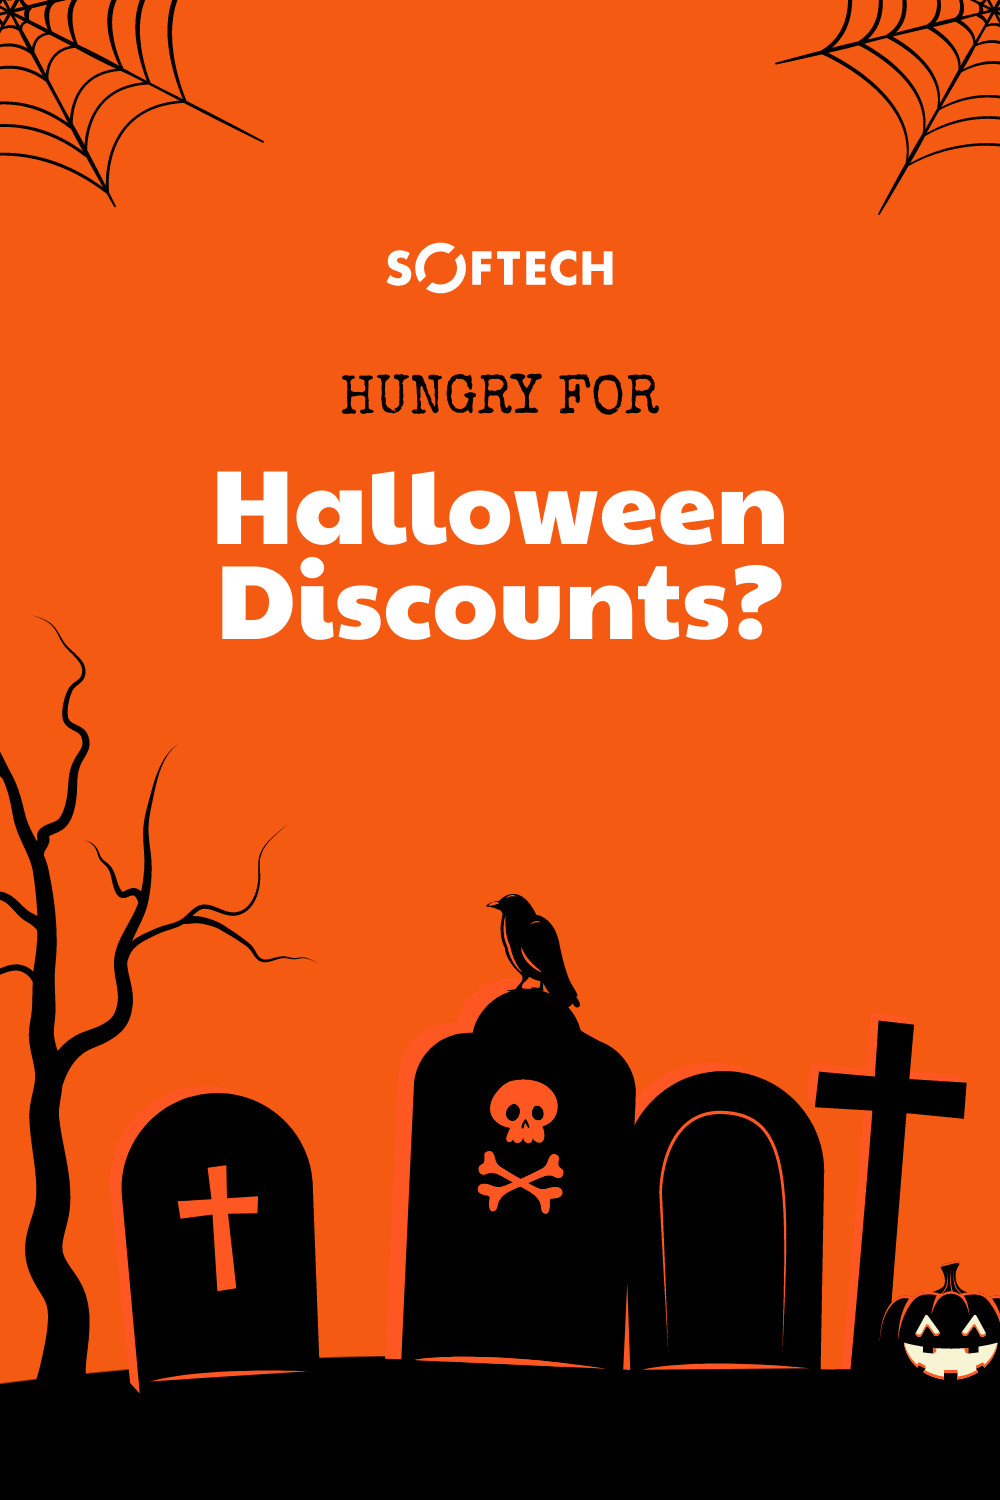 Hungry Halloween Cemetery Discounts